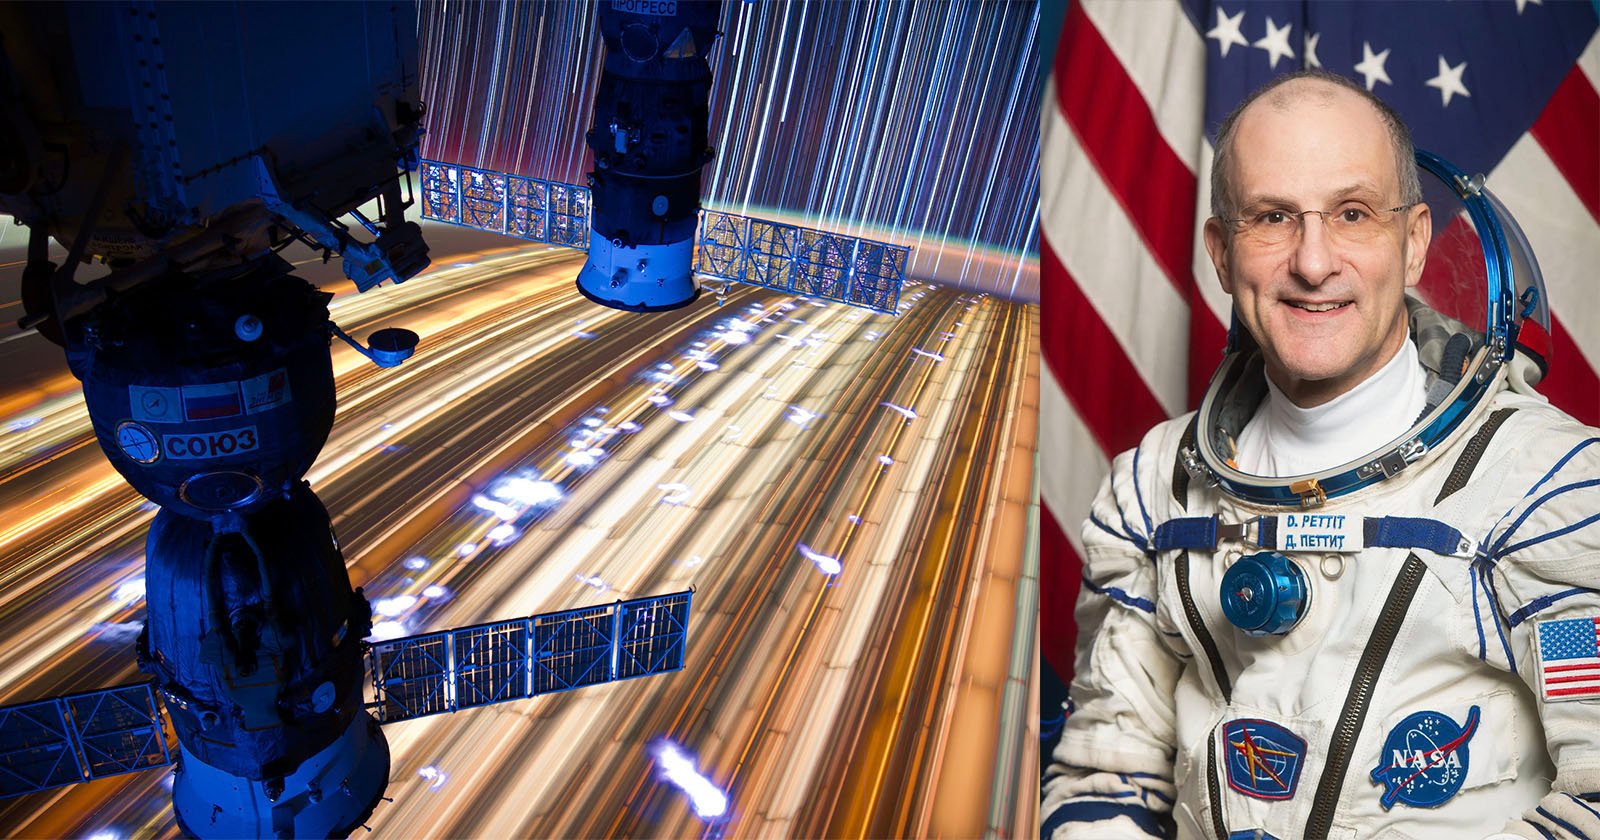 Don Pettit, The Best Photographer to Ever Visit Space, Will Return to the ISS